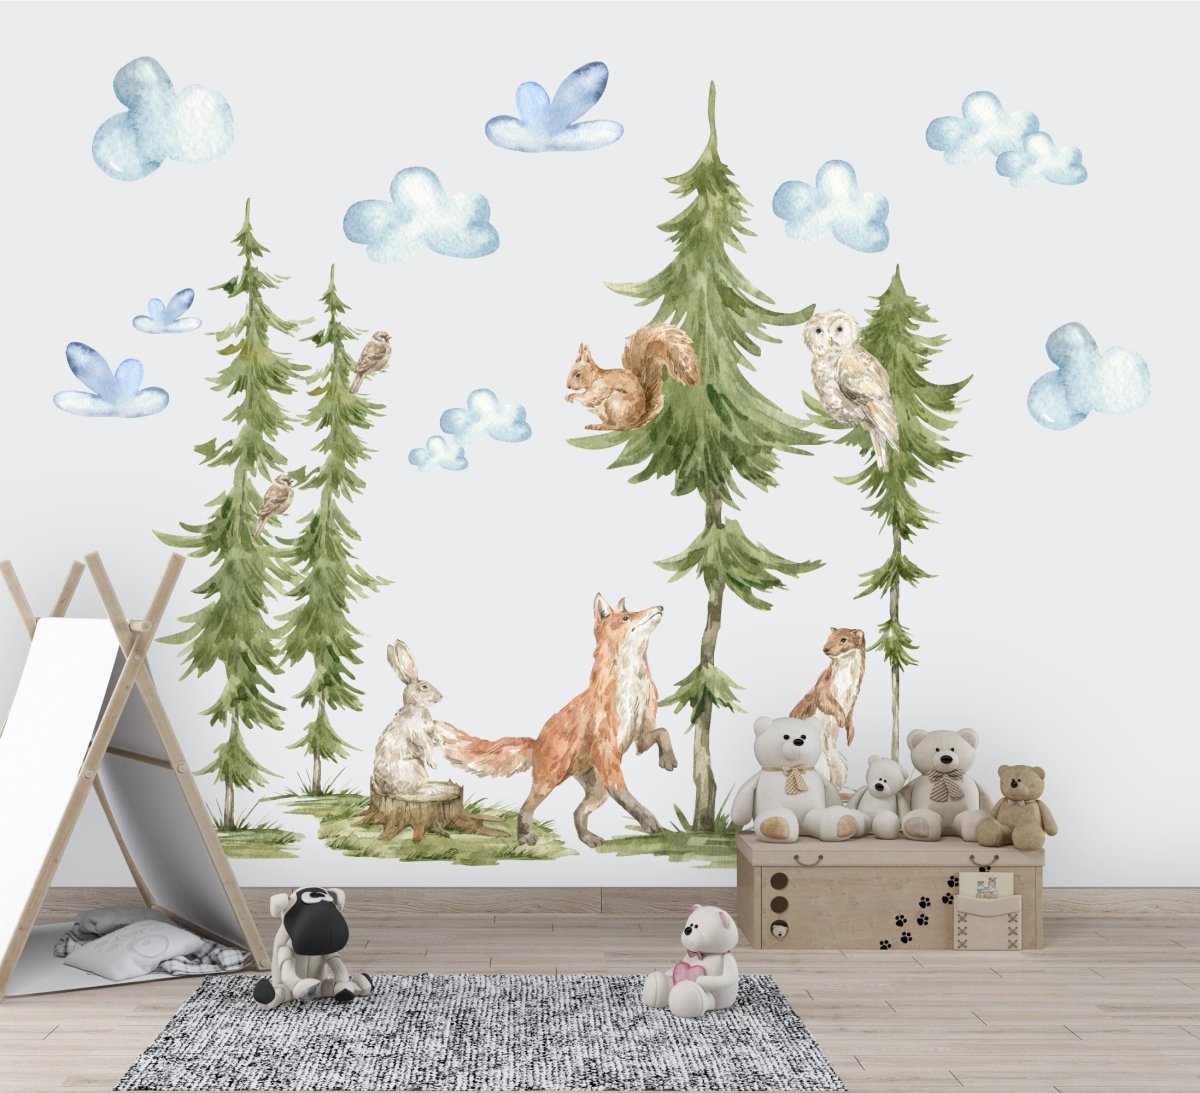 FOREST TREES WALL Decal - Woodland Trees Wall Decal - Woodland Trees Sticker - Forest Trees